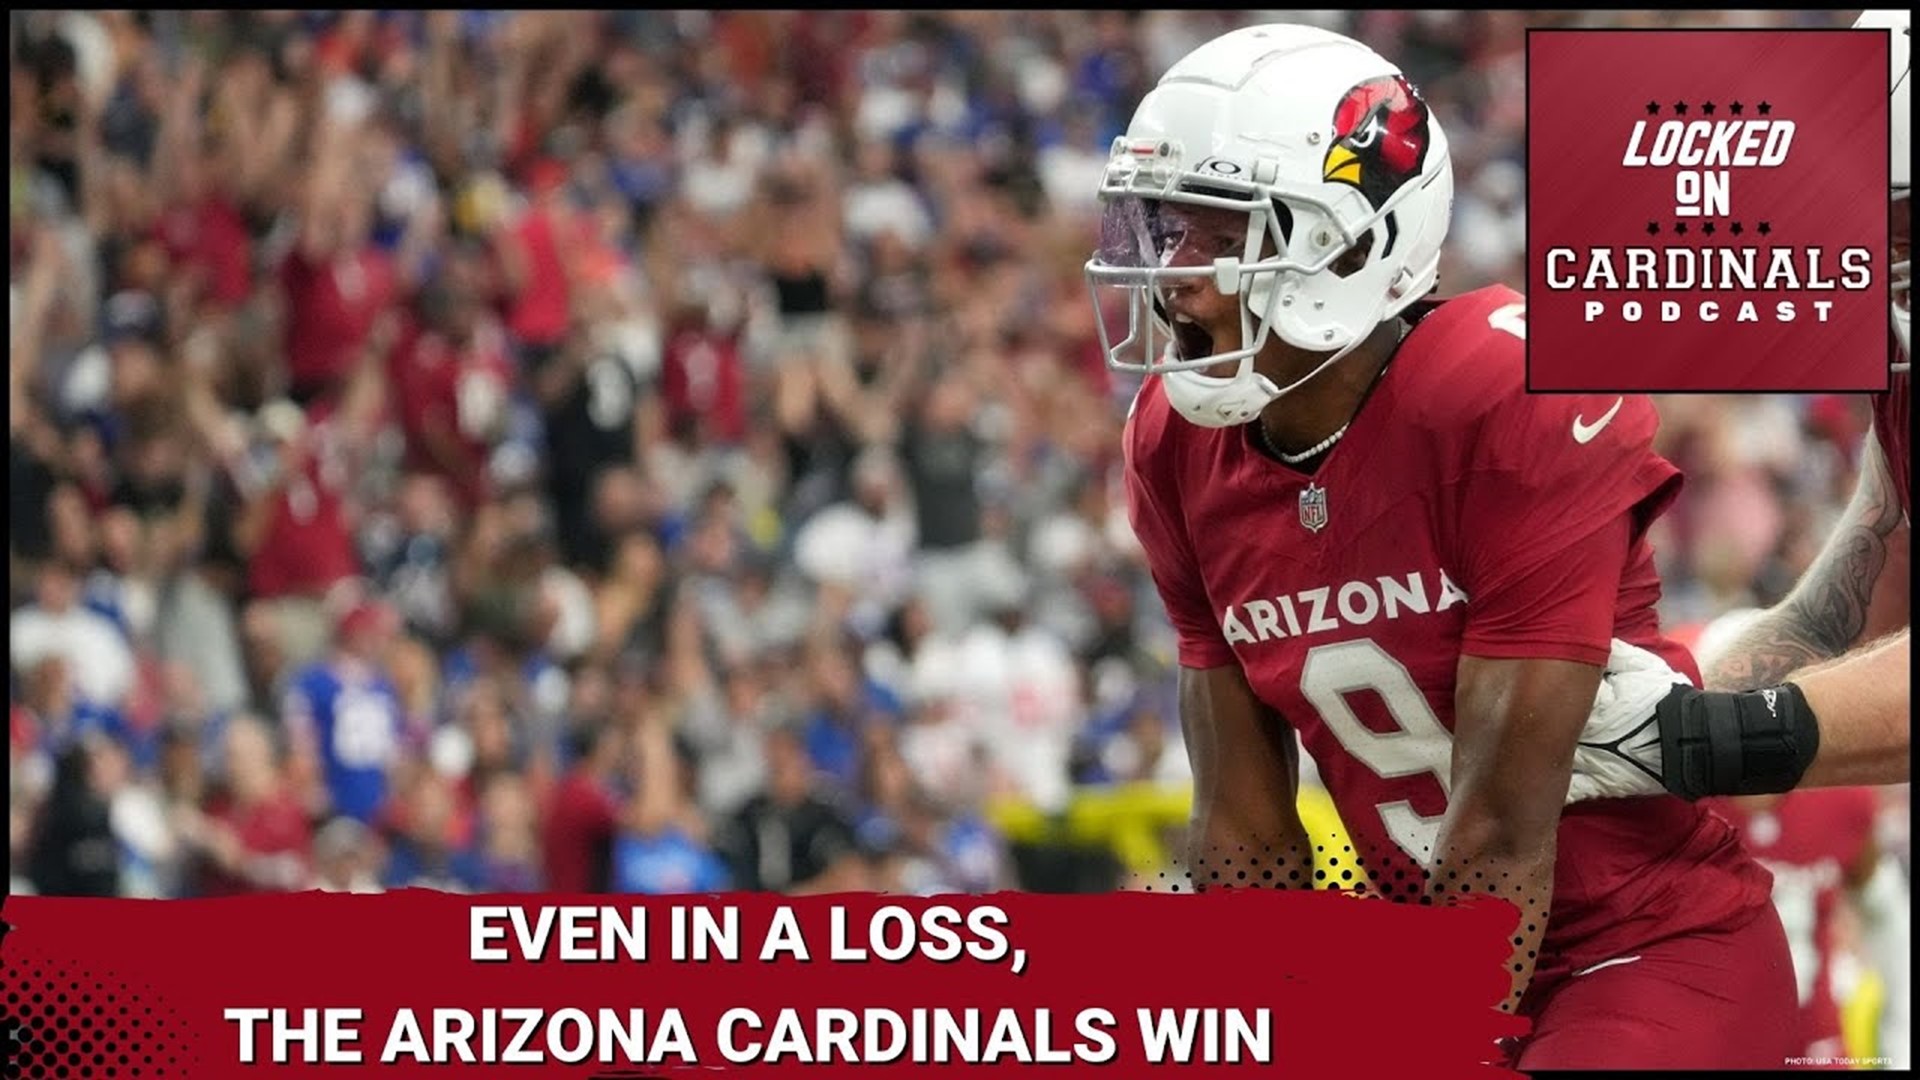 Arizona Cardinals fall 31-28 to the New York Giants but that's not even close to the entire story.